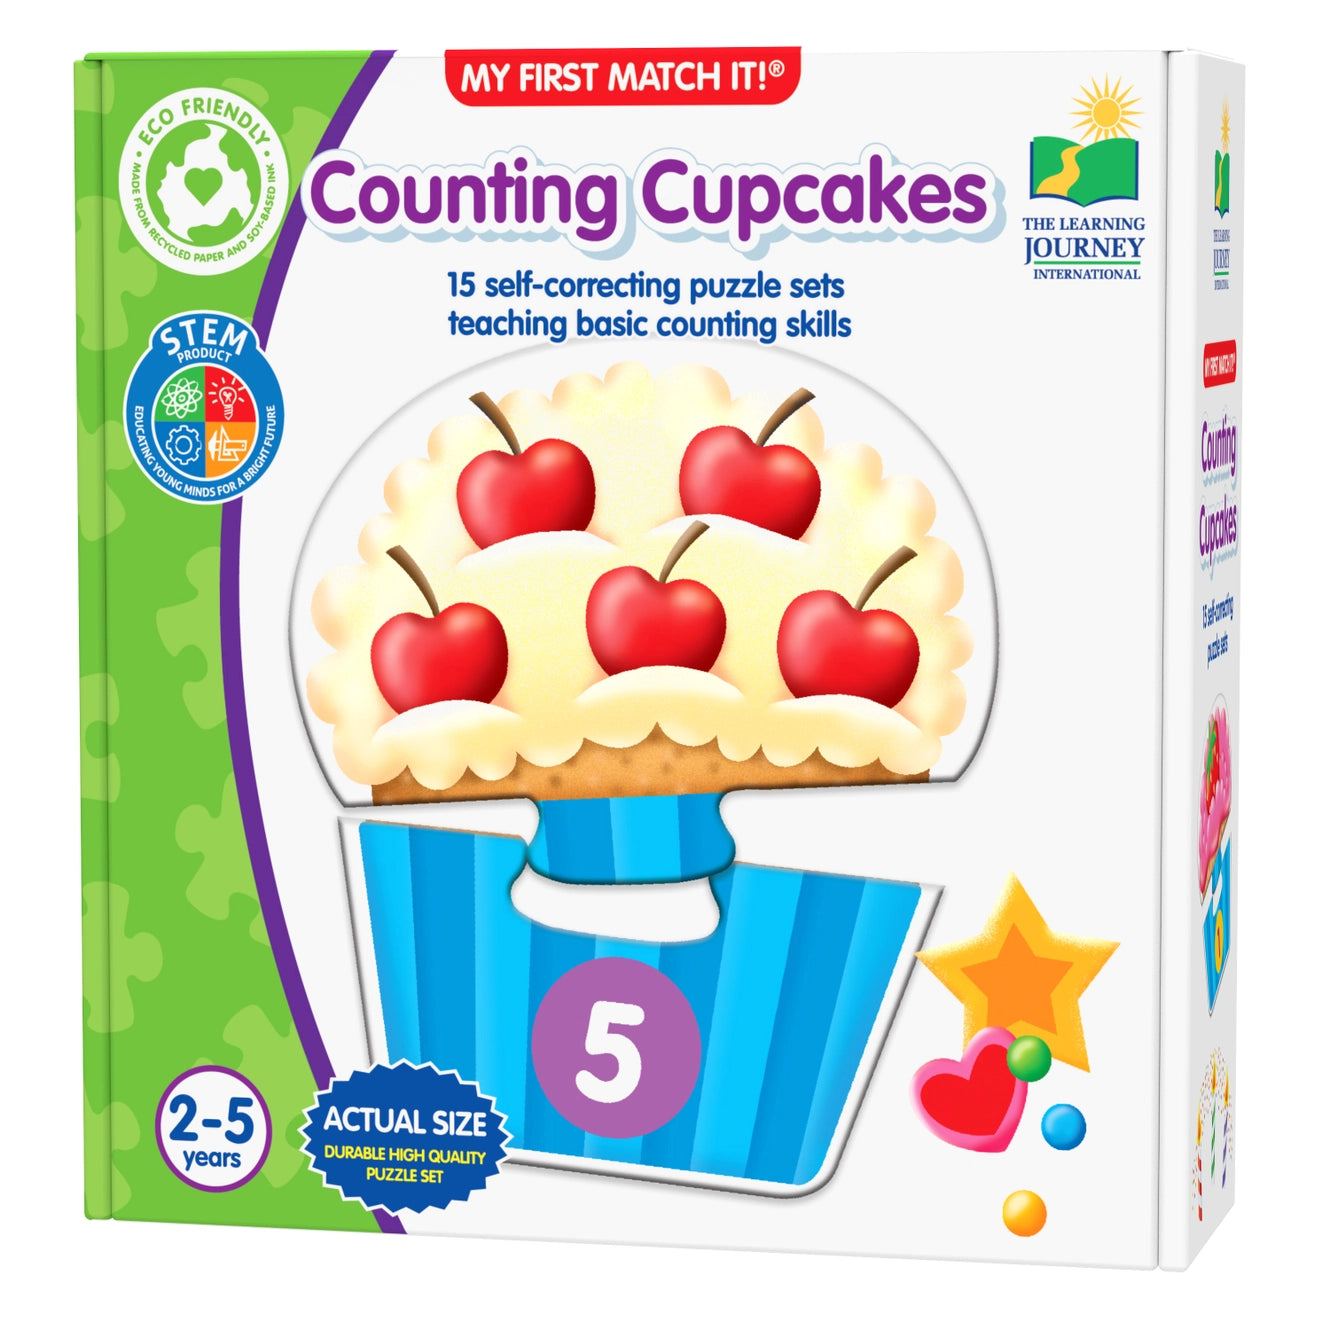 My First Match It! Counting Cupcakes